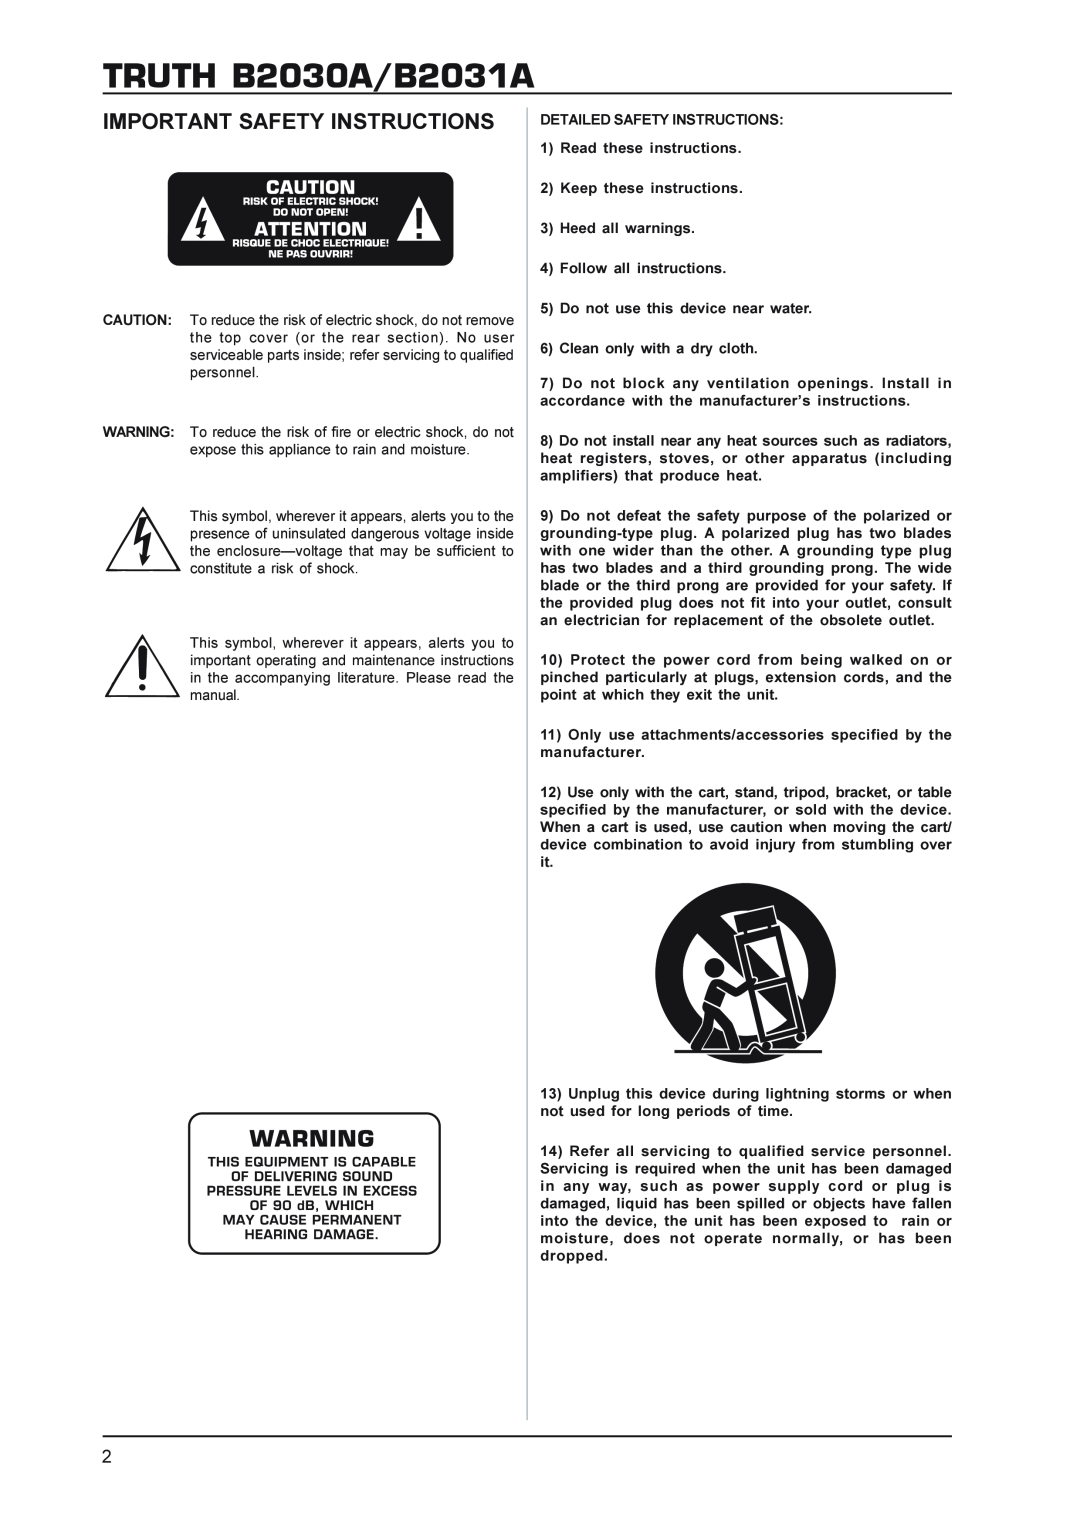 Behringer TRUTHB2030A manual TRUTH B2030A/B2031A, Important Safety Instructions 